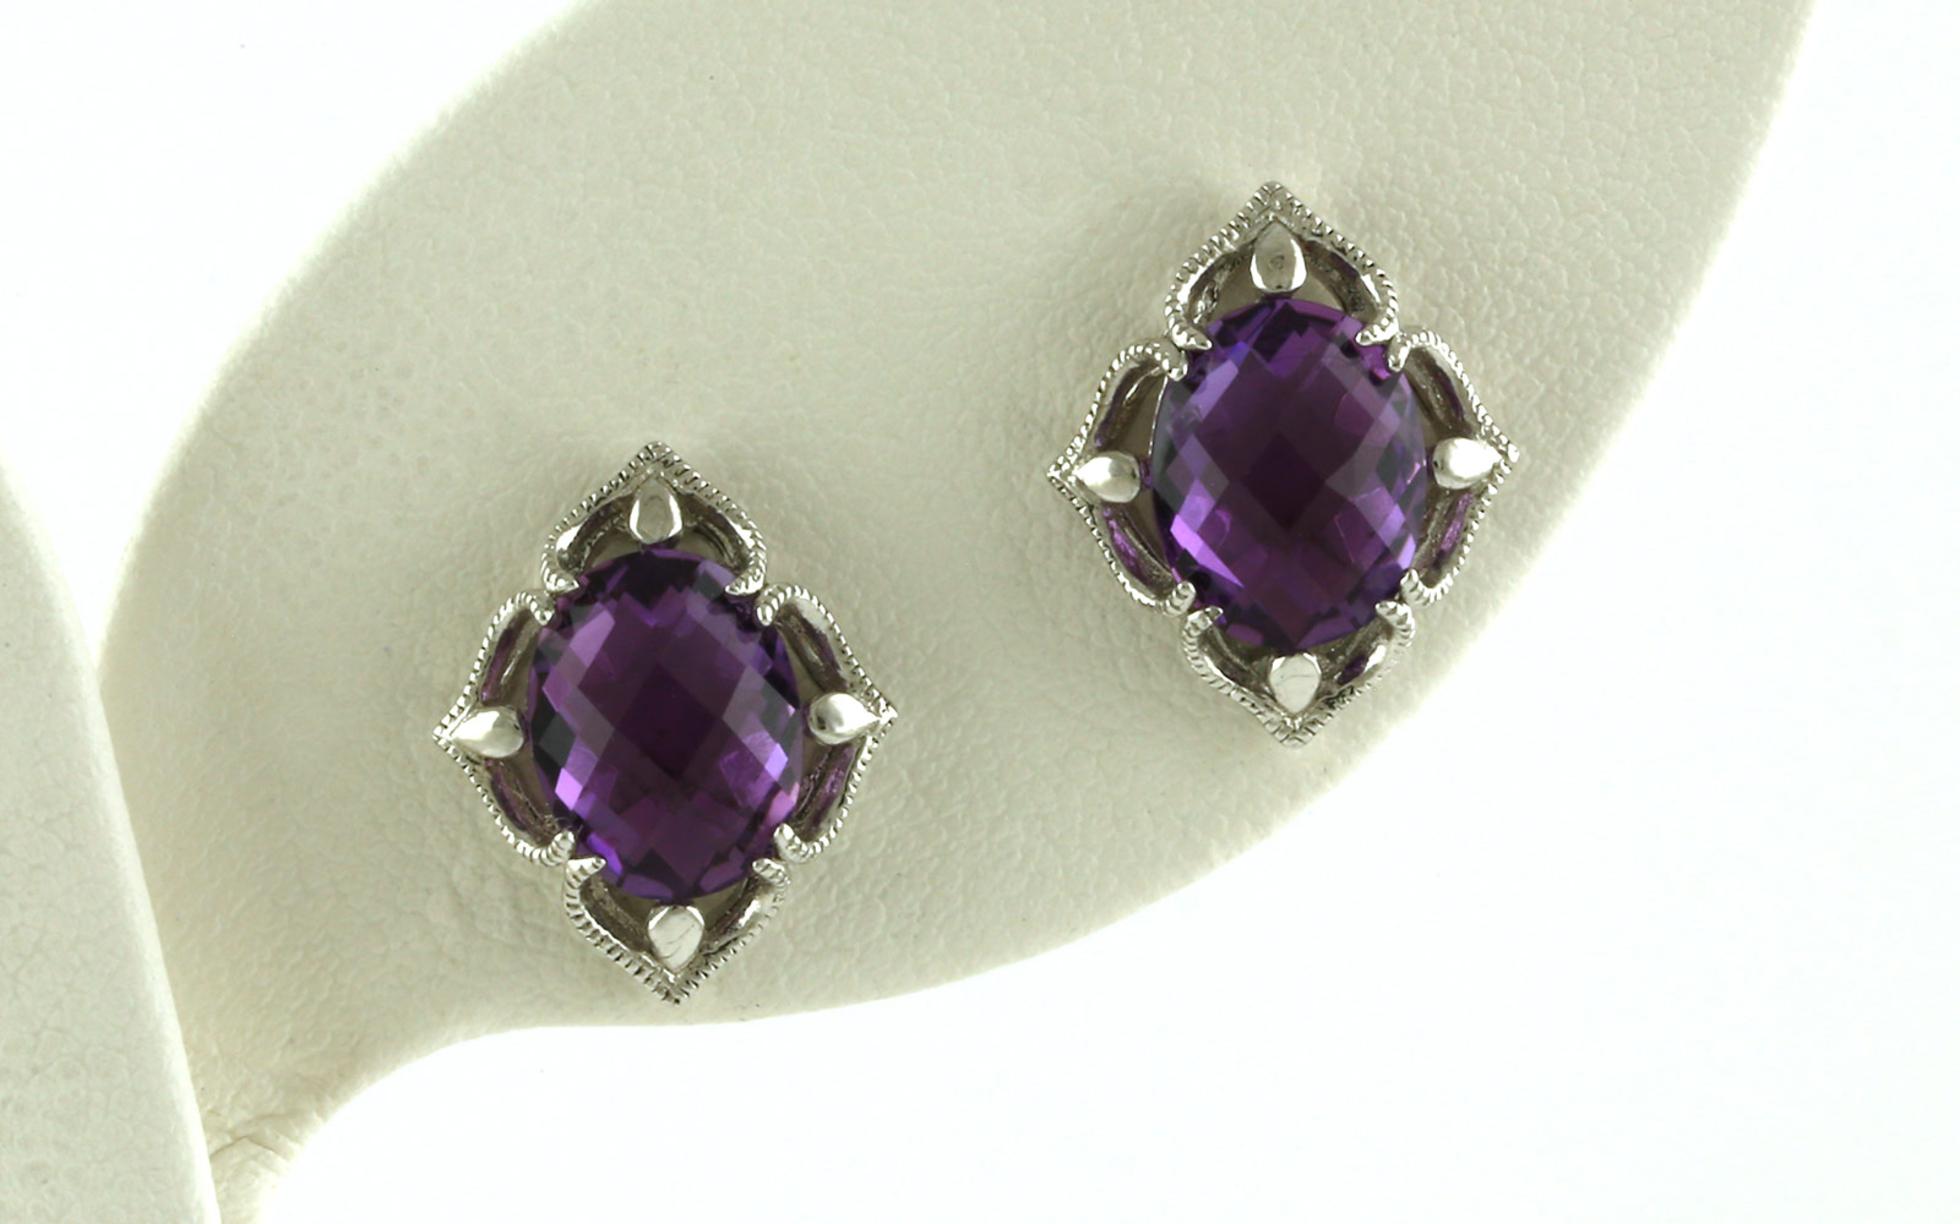 Antique-style Oval-cut Amethyst Earrings with Milgrain Details in Sterling Silver